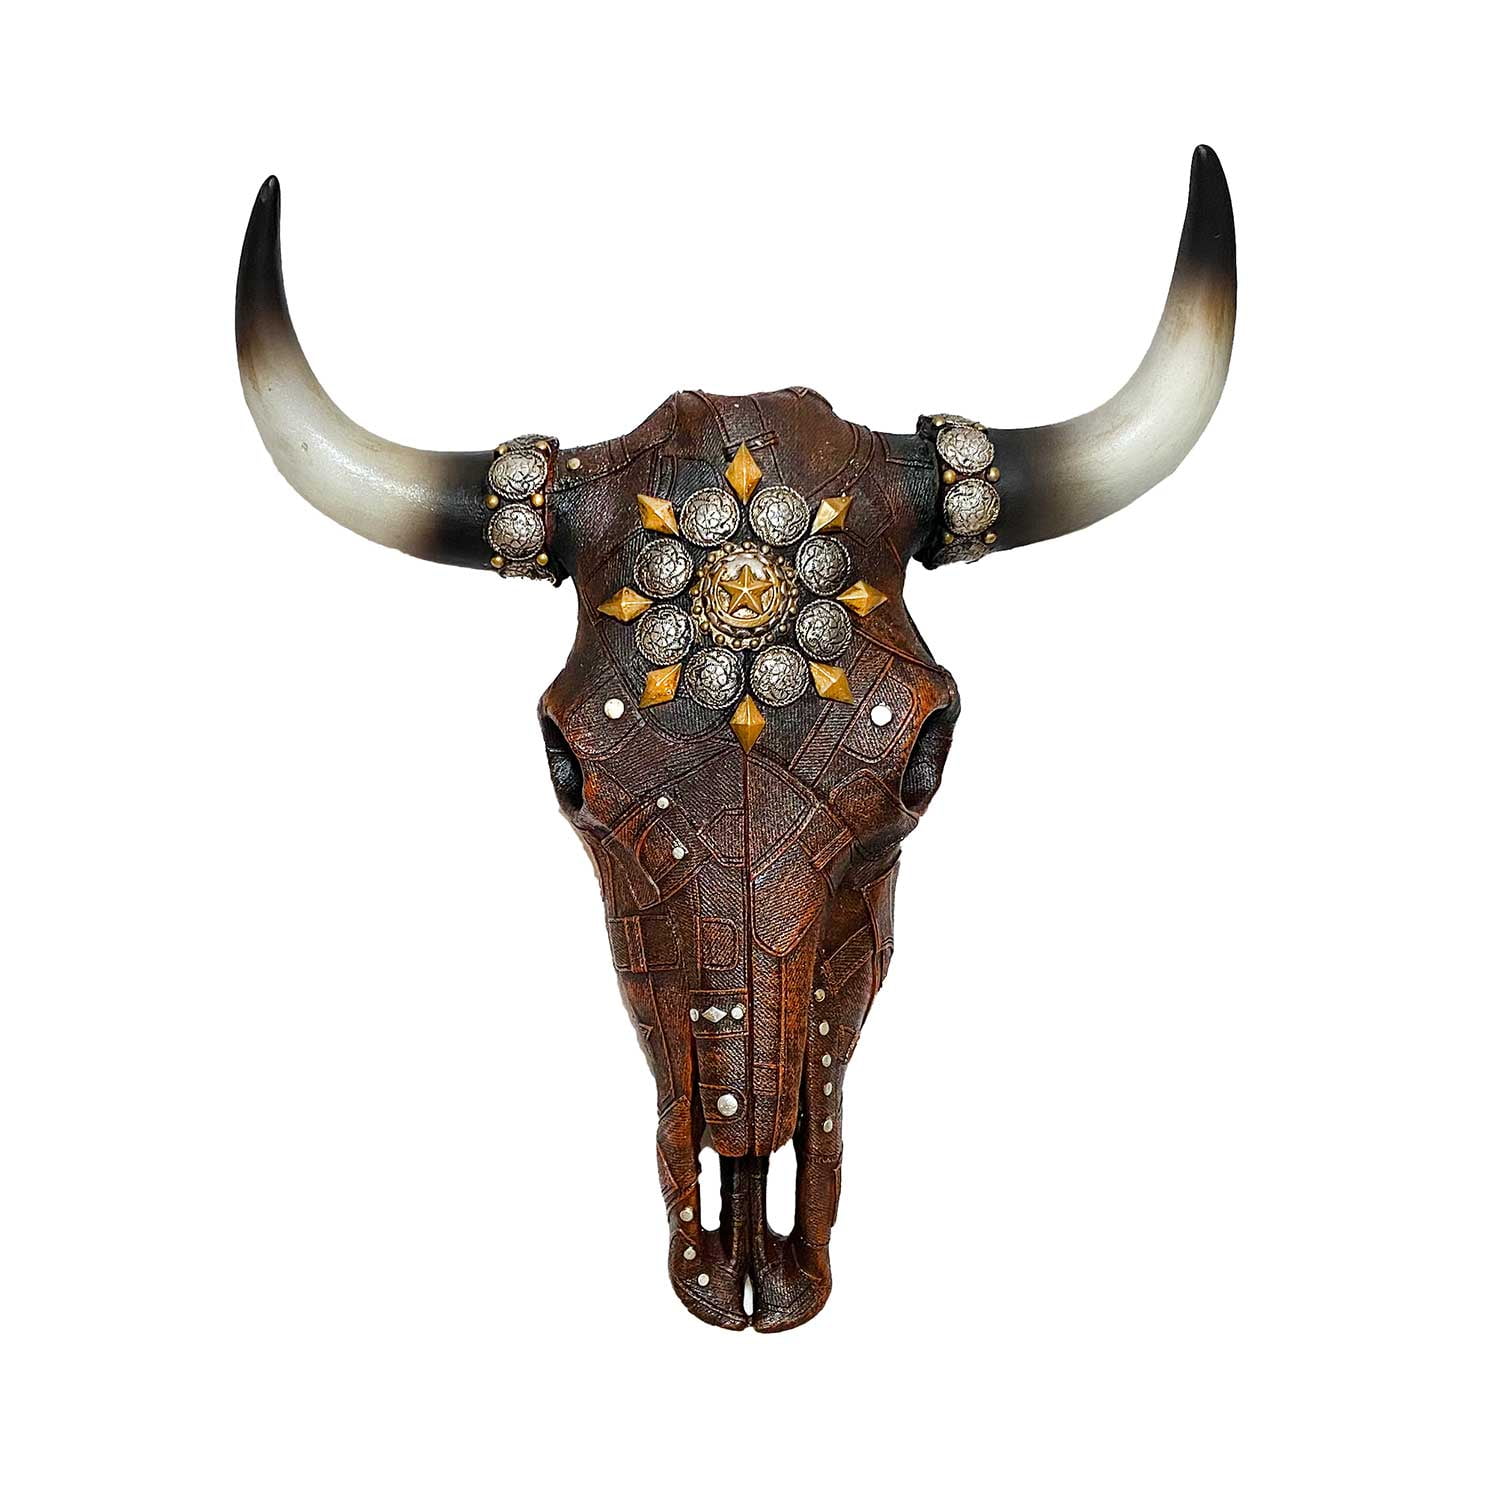 Ranch Decor Longhorn Wall Decor with Faux Leather & Studs LARGE 40 "Western 